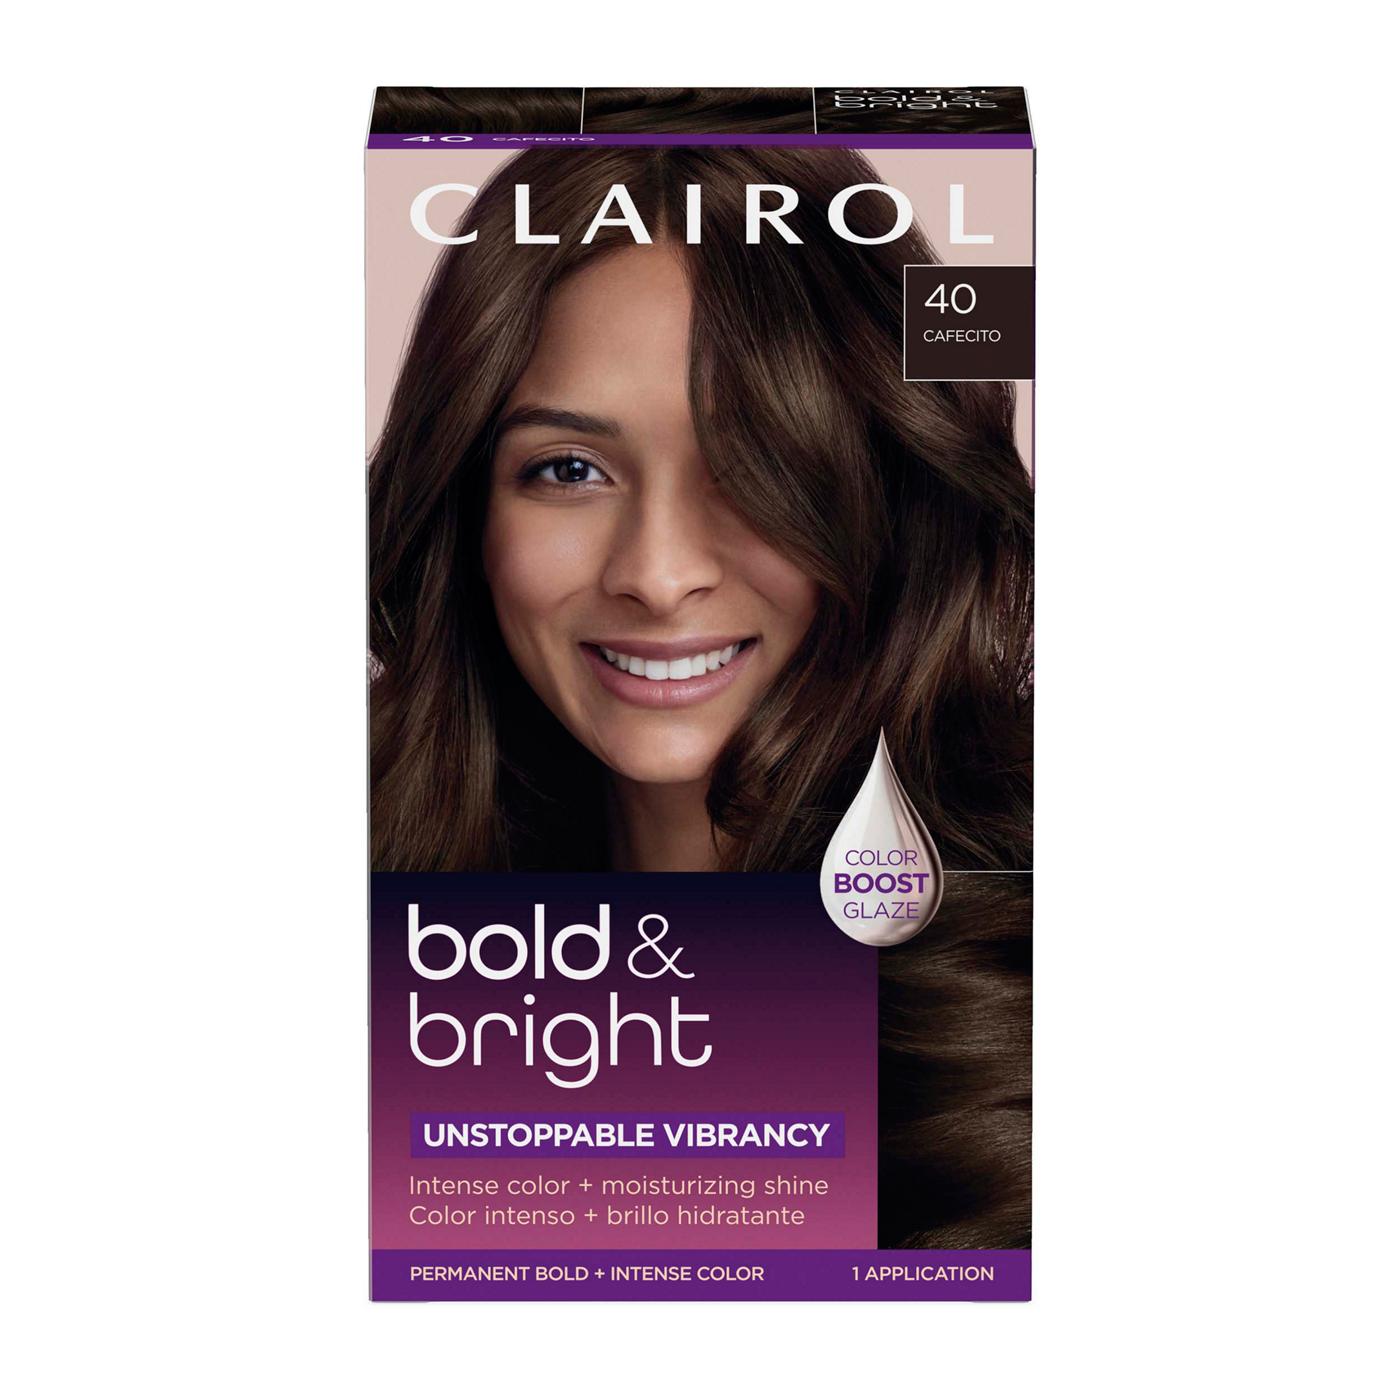 Clairol Bold & Bright Permanent Hair Color - 40 Cafecito; image 1 of 11